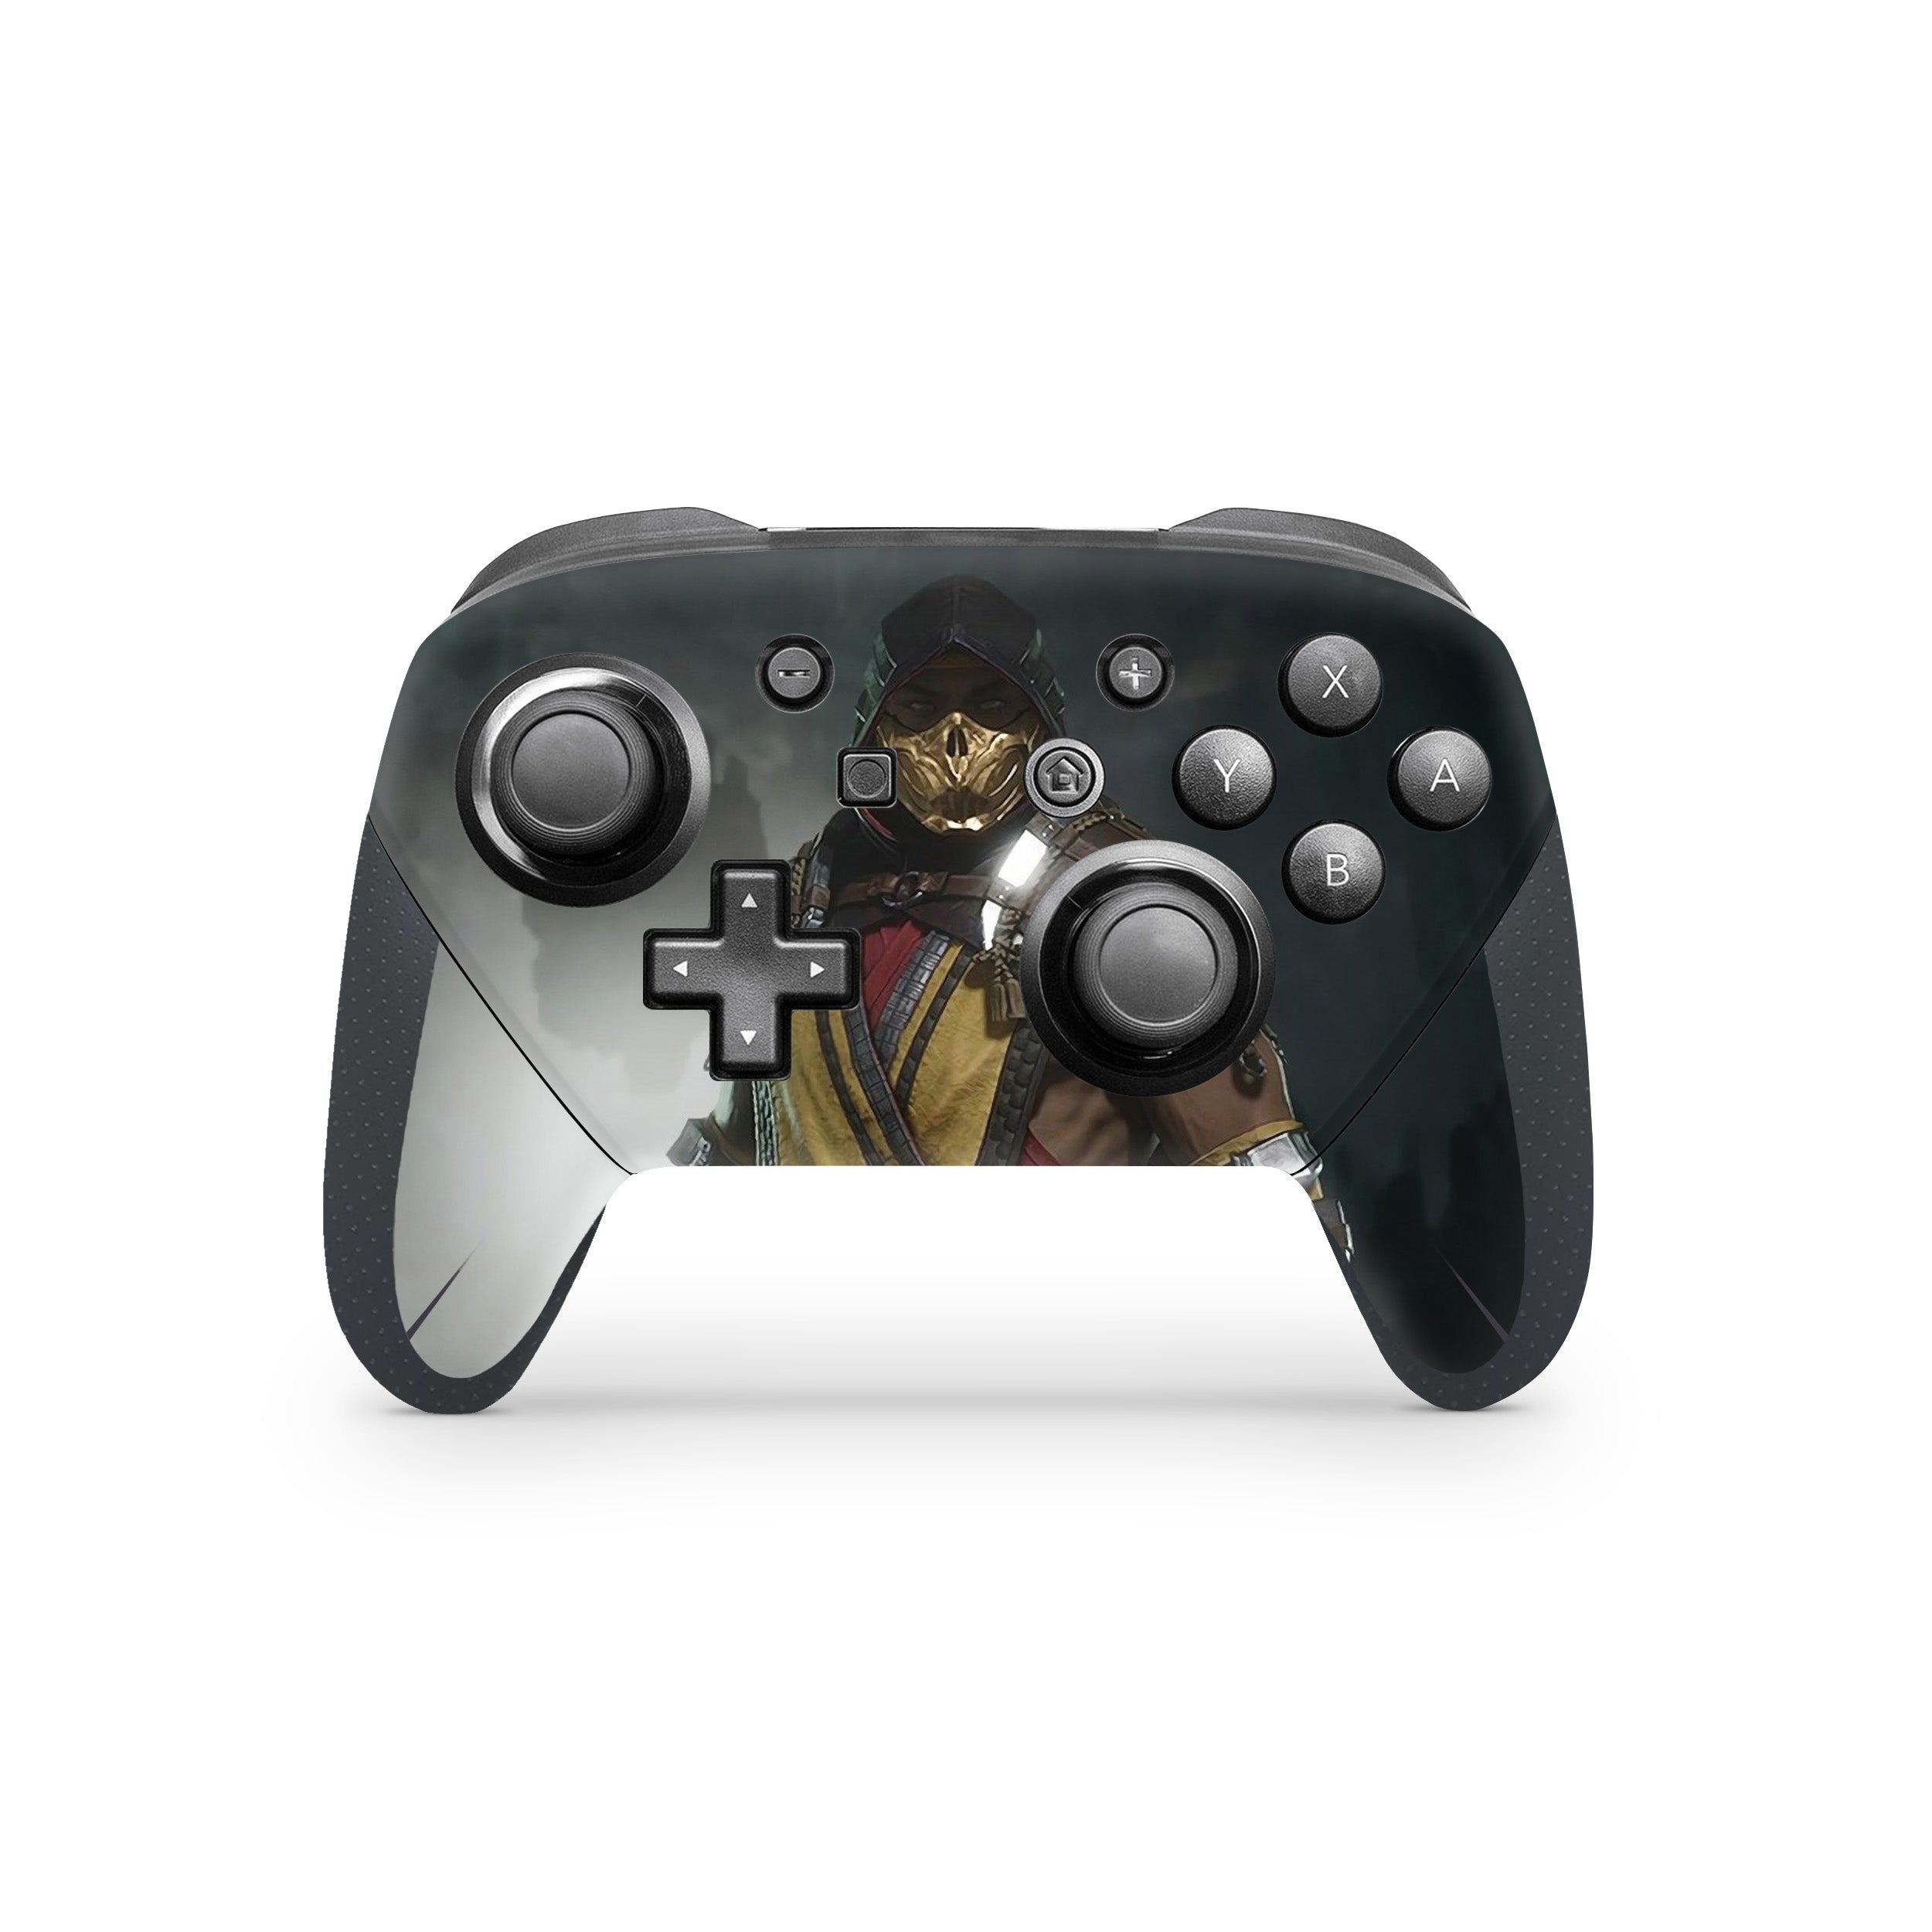 A video game skin featuring a Mortal Kombat 11 Raiden design for the Switch Pro Controller.